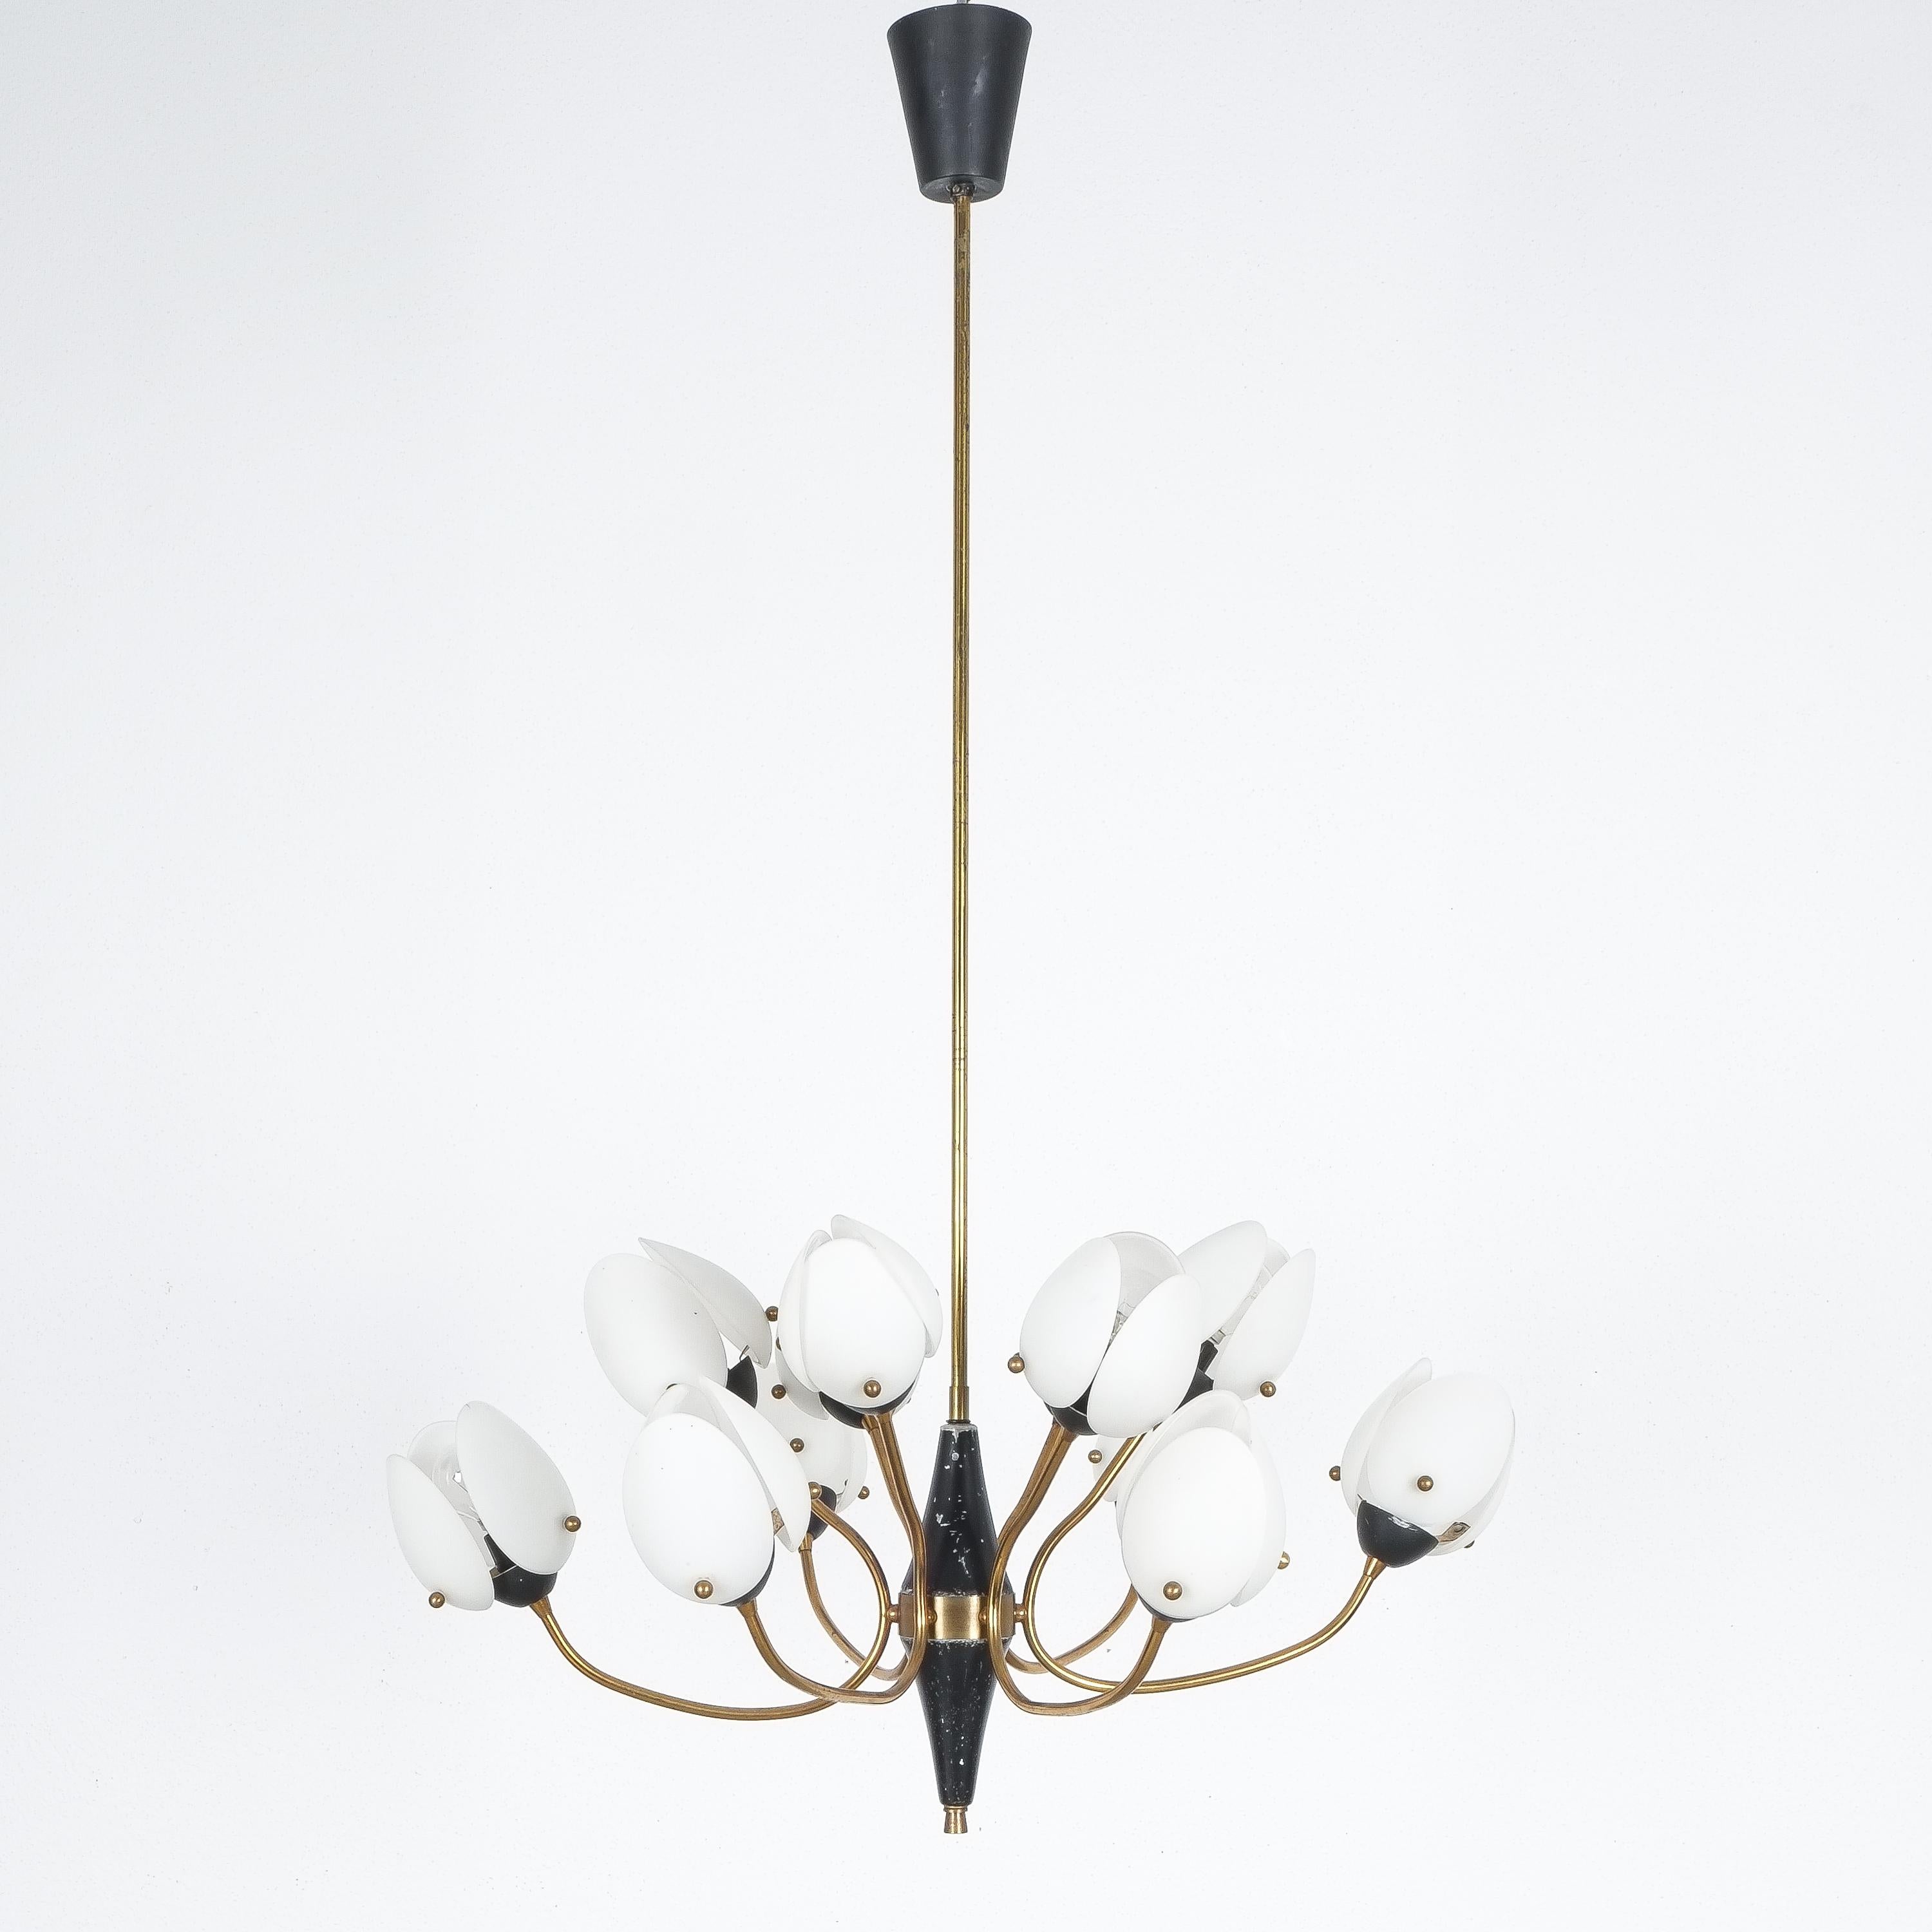 Chandelier from satinized glass and brass Italy, circa 1950- labelled Milano Stilnovo Italy (sticker)

Rare and large 25.6